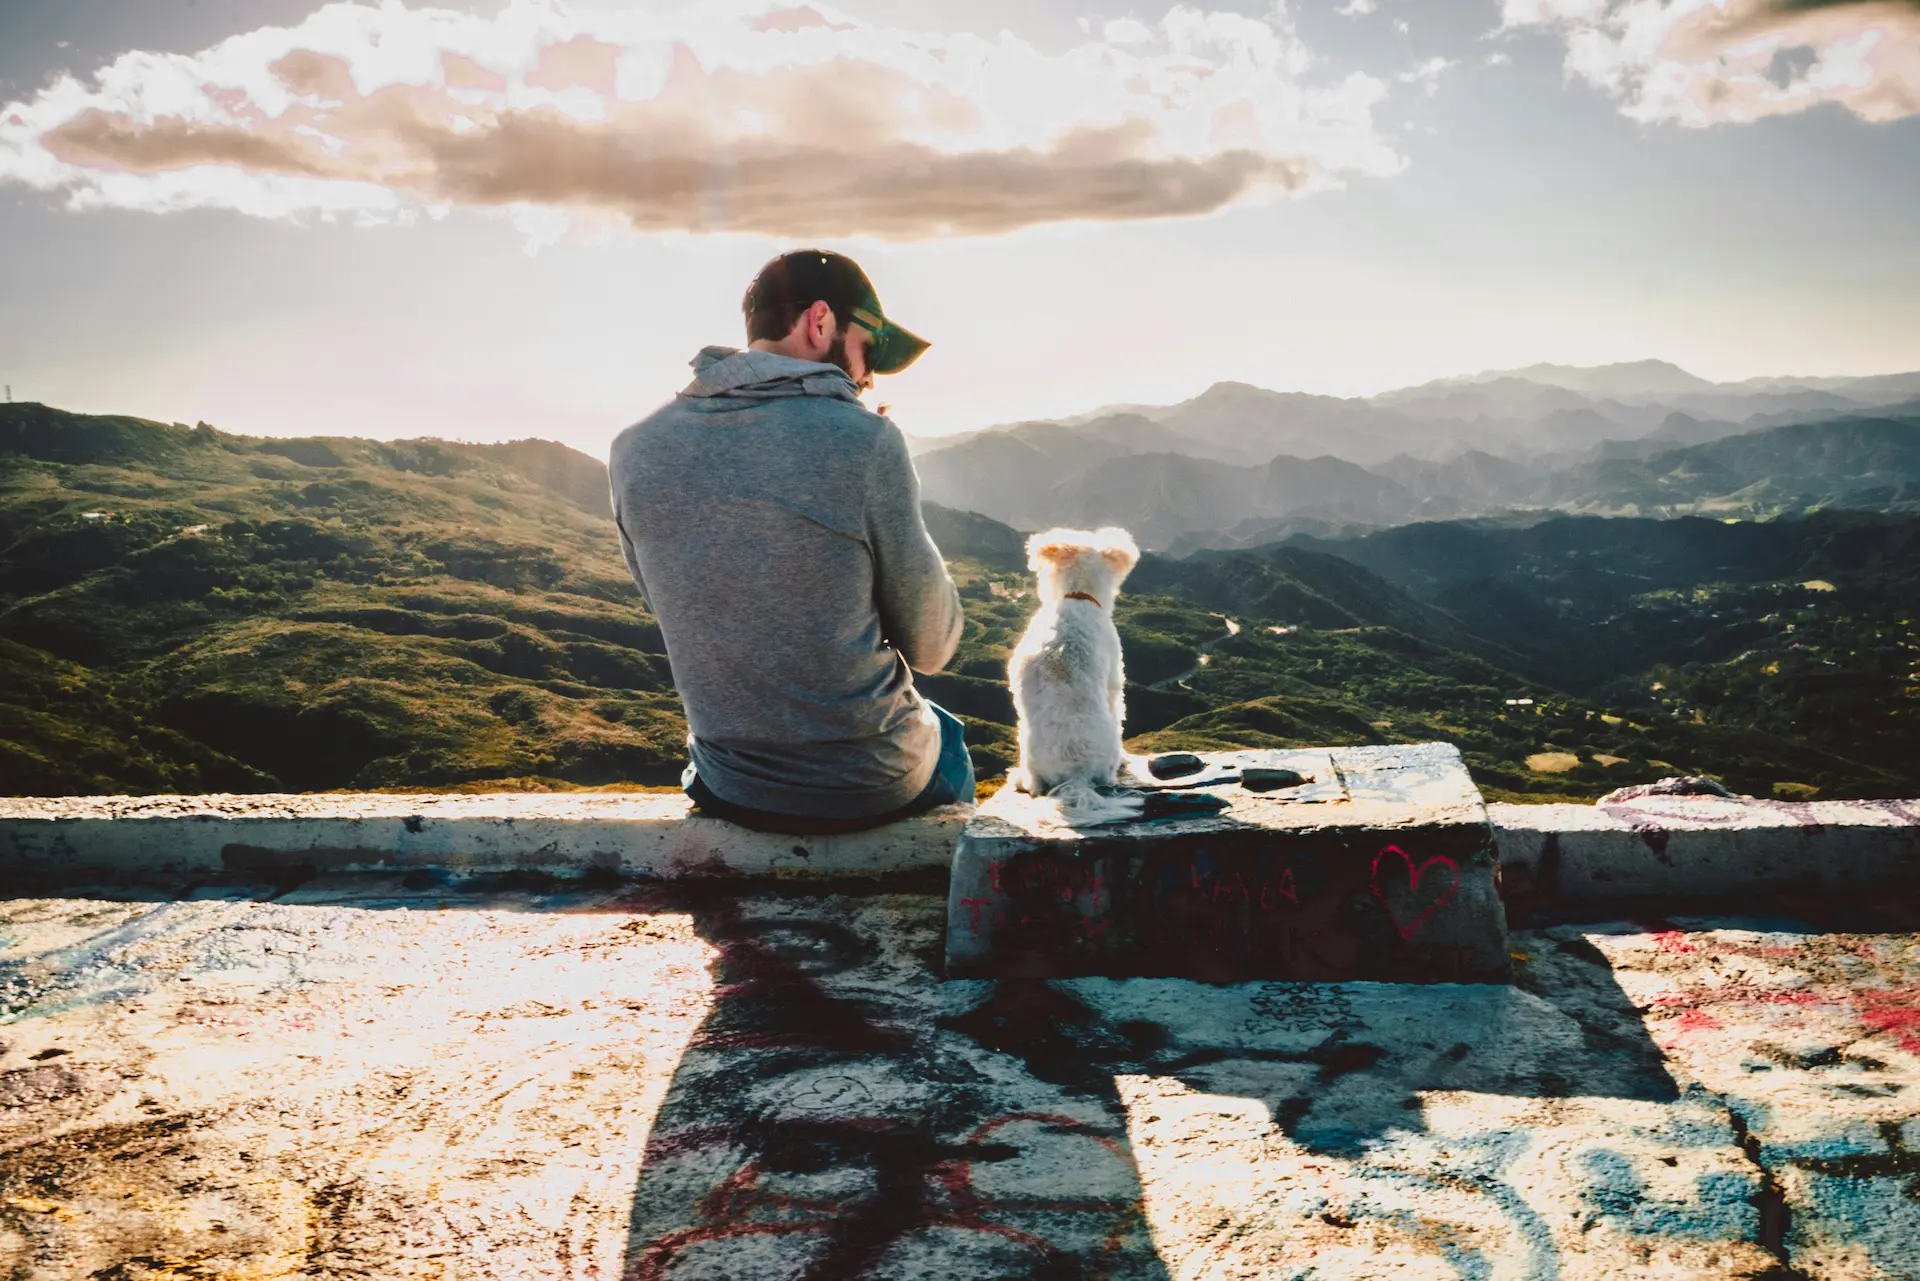 Man and dog sitting on stone overlooking hills and valleys together.